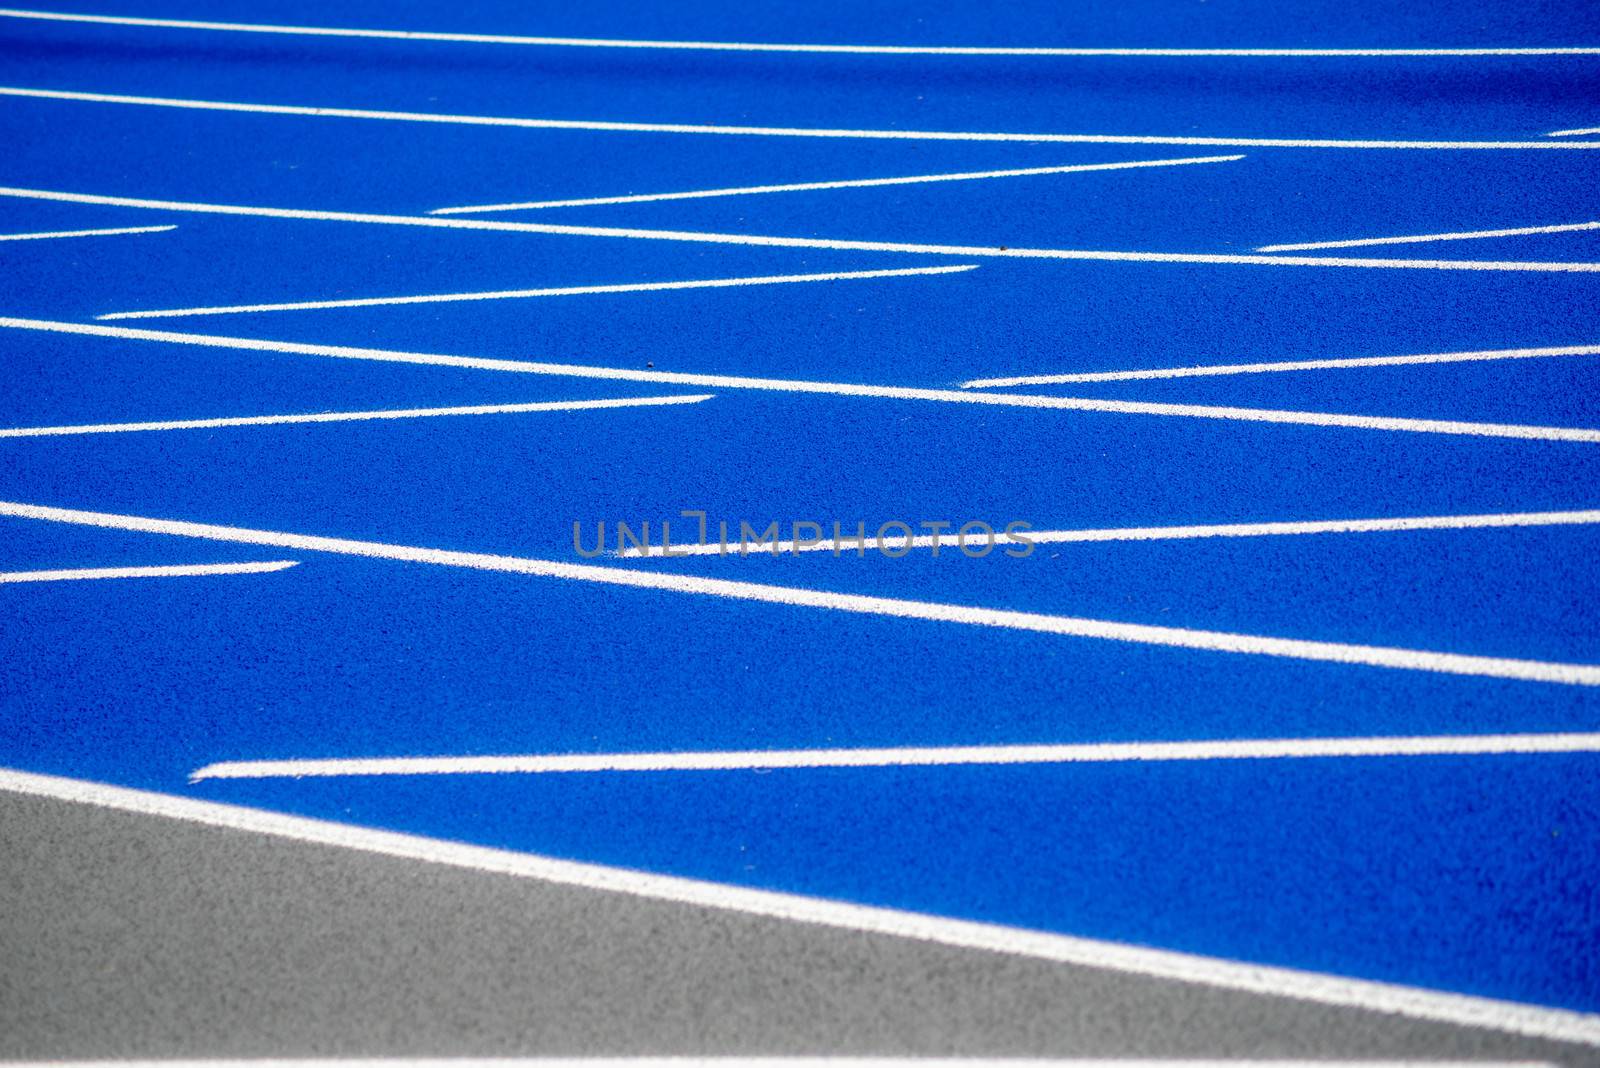 White lines on surface of blue running track. by marysalen